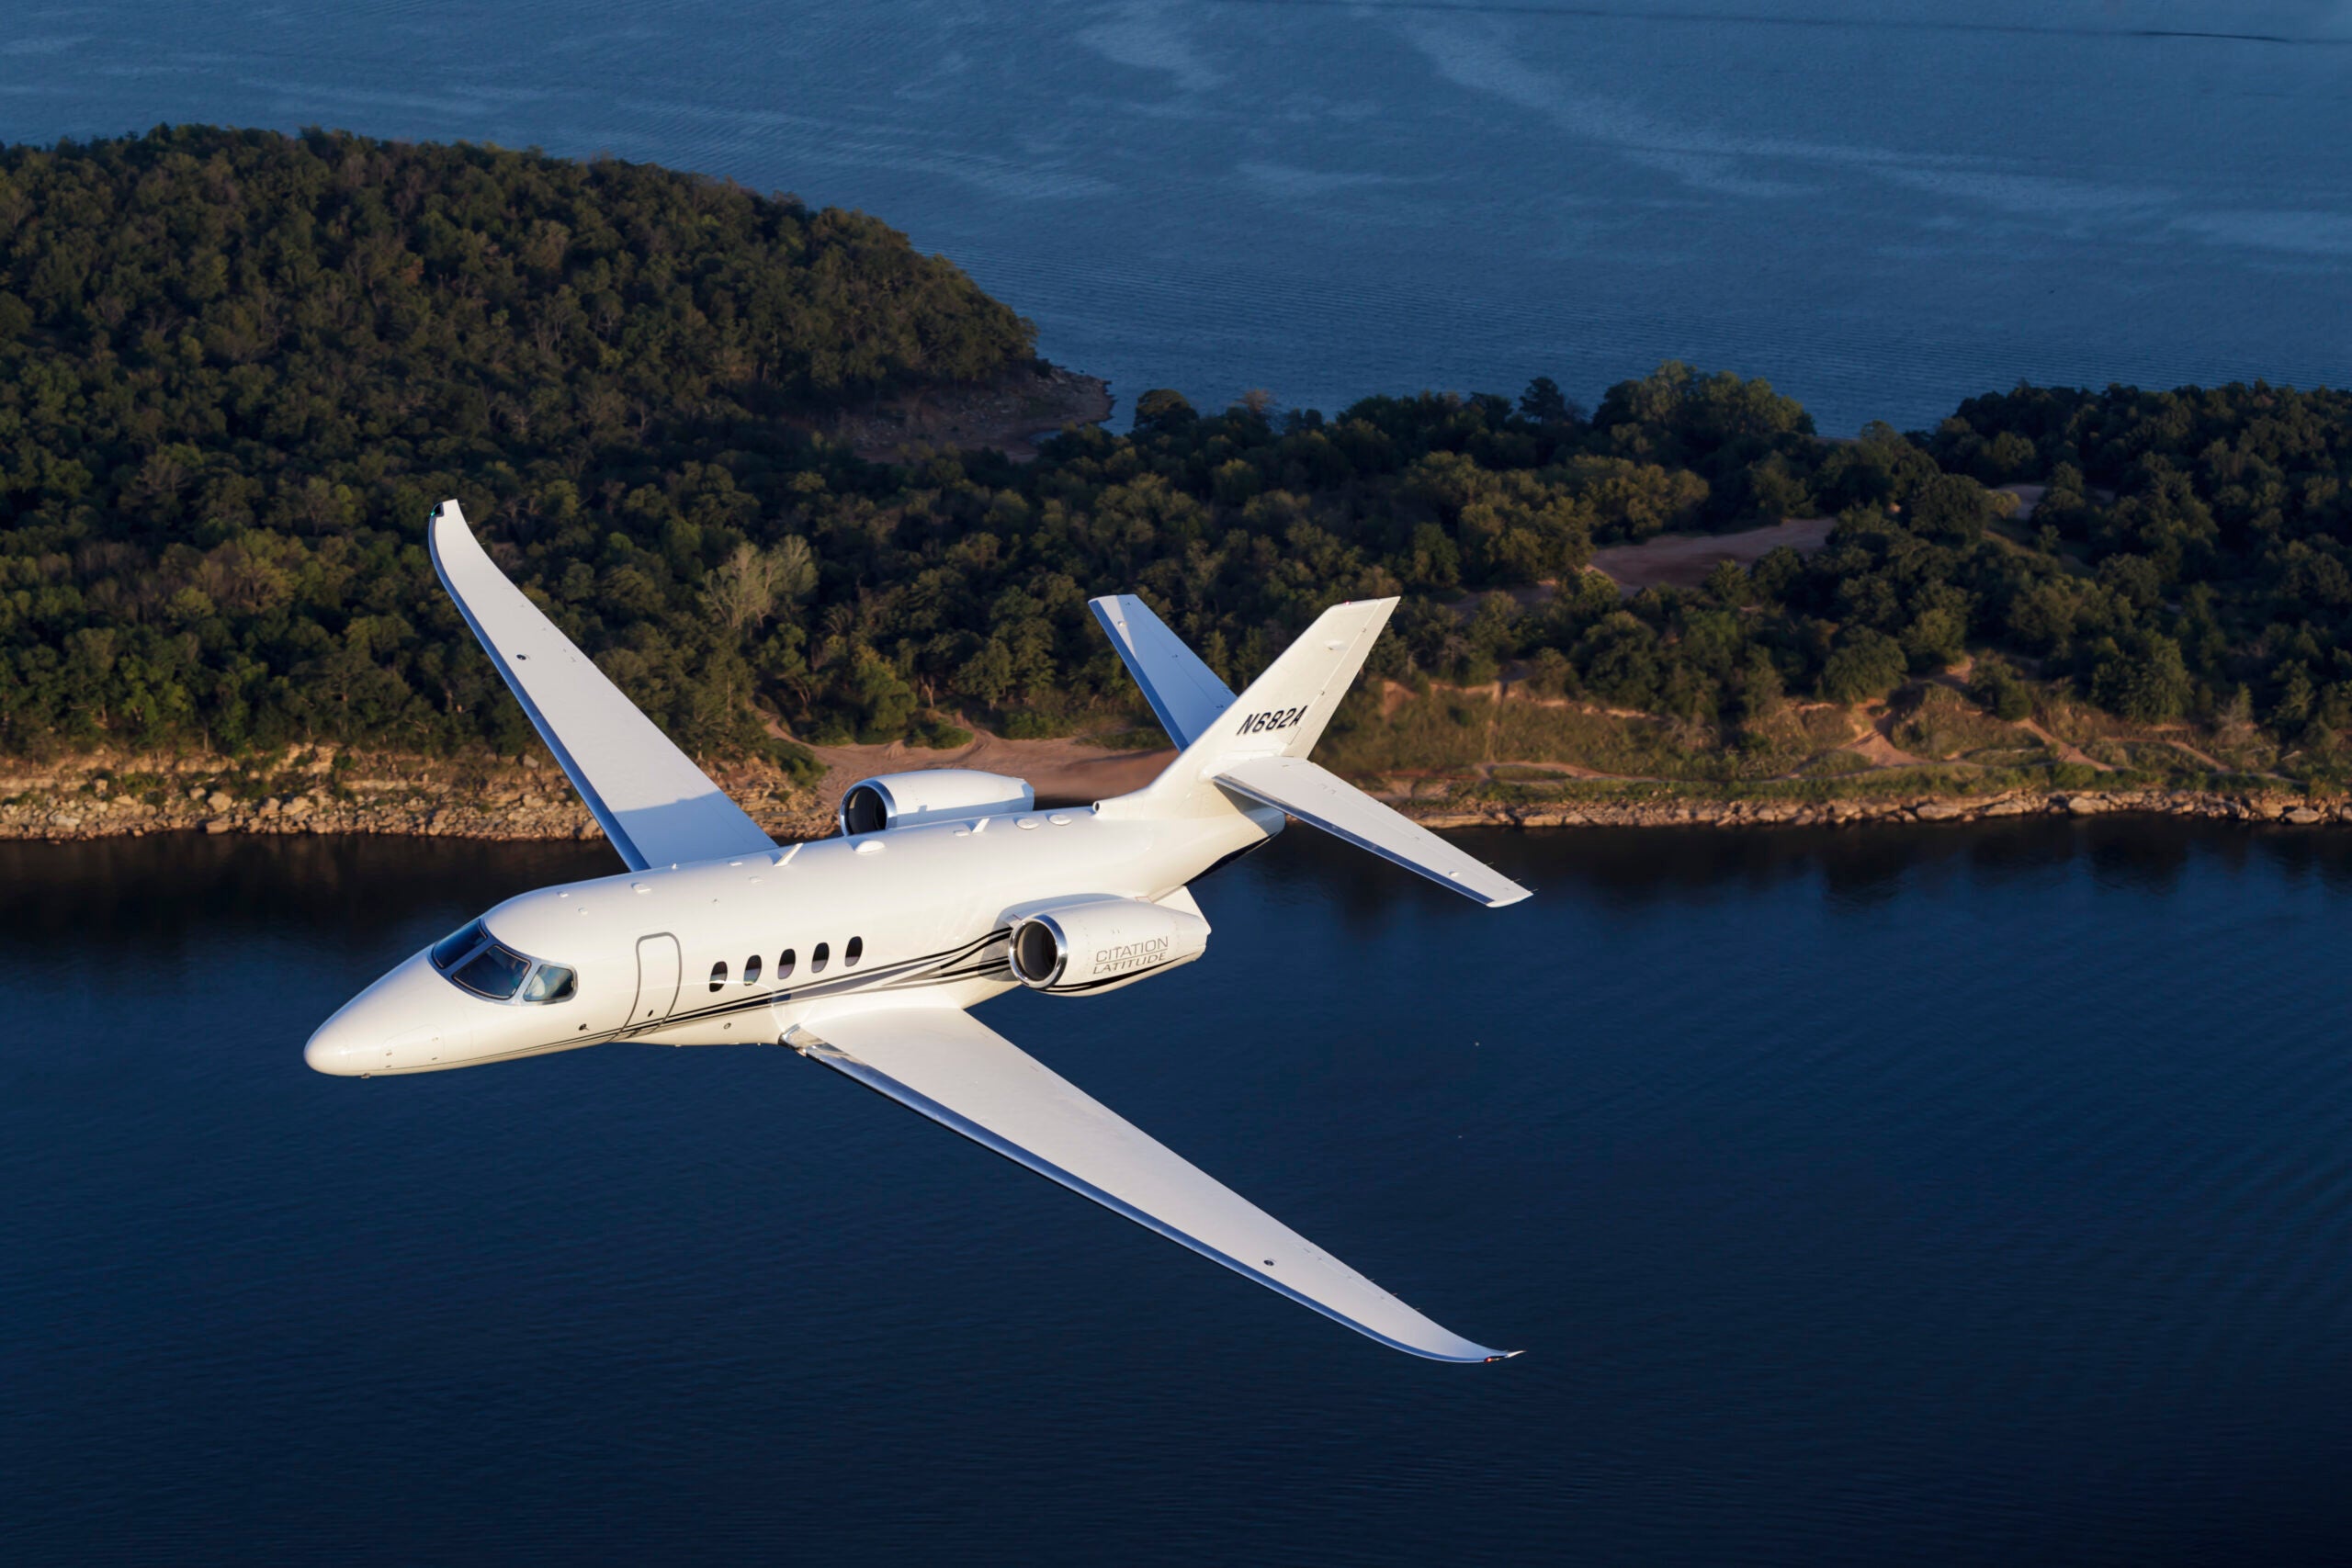 7,000th Citation Delivery Celebrated with Big Order